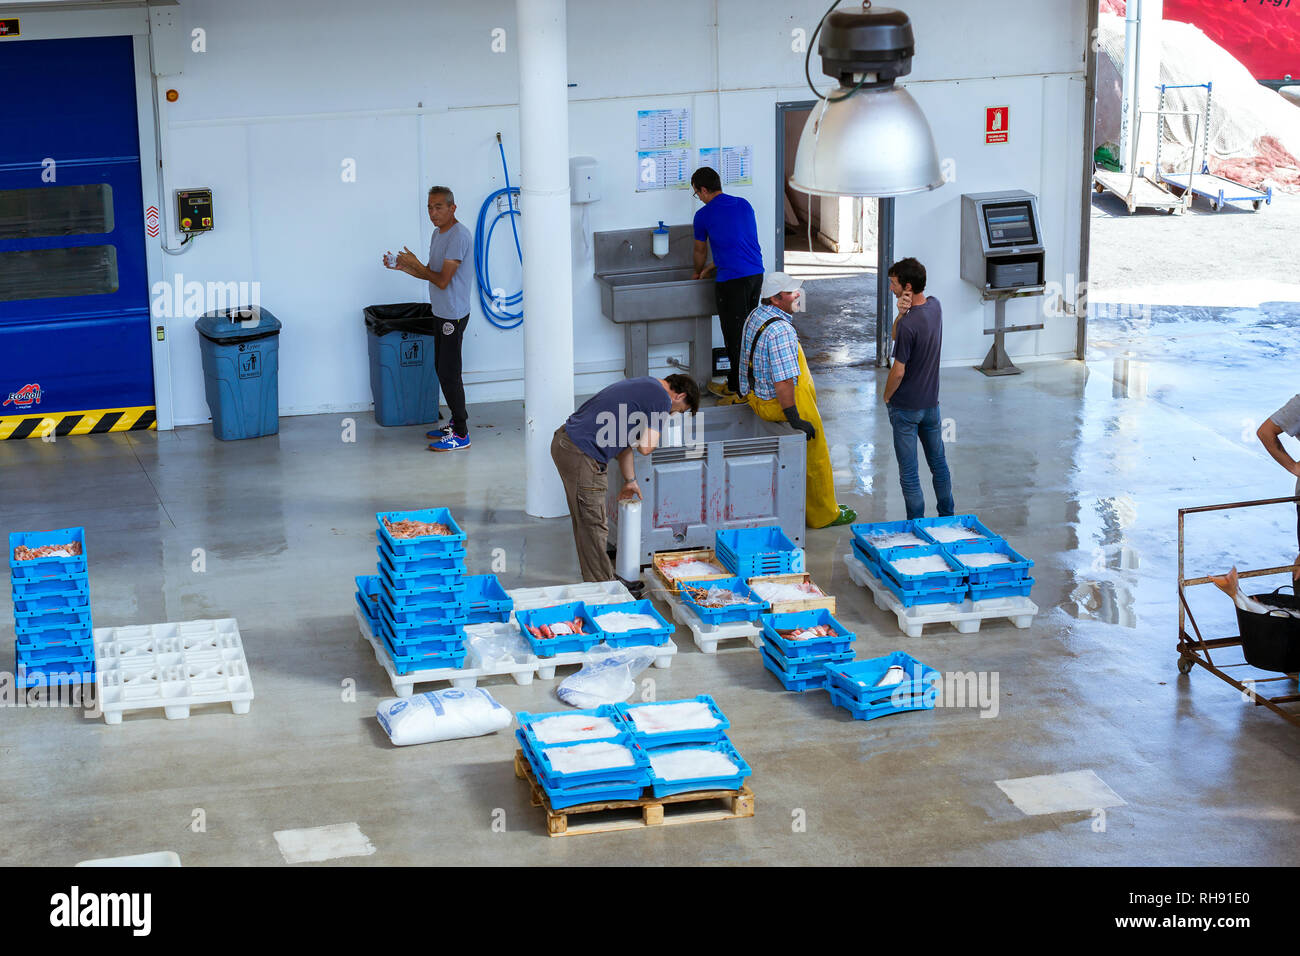 Blanes, Spain - 31 may, 2018: Buyers are traded at conveyor. Fish auction for wholesalers and restaurants. Blue plastic containers with catch of sea fish ocean delicacies. Industrial catch of fish Stock Photo